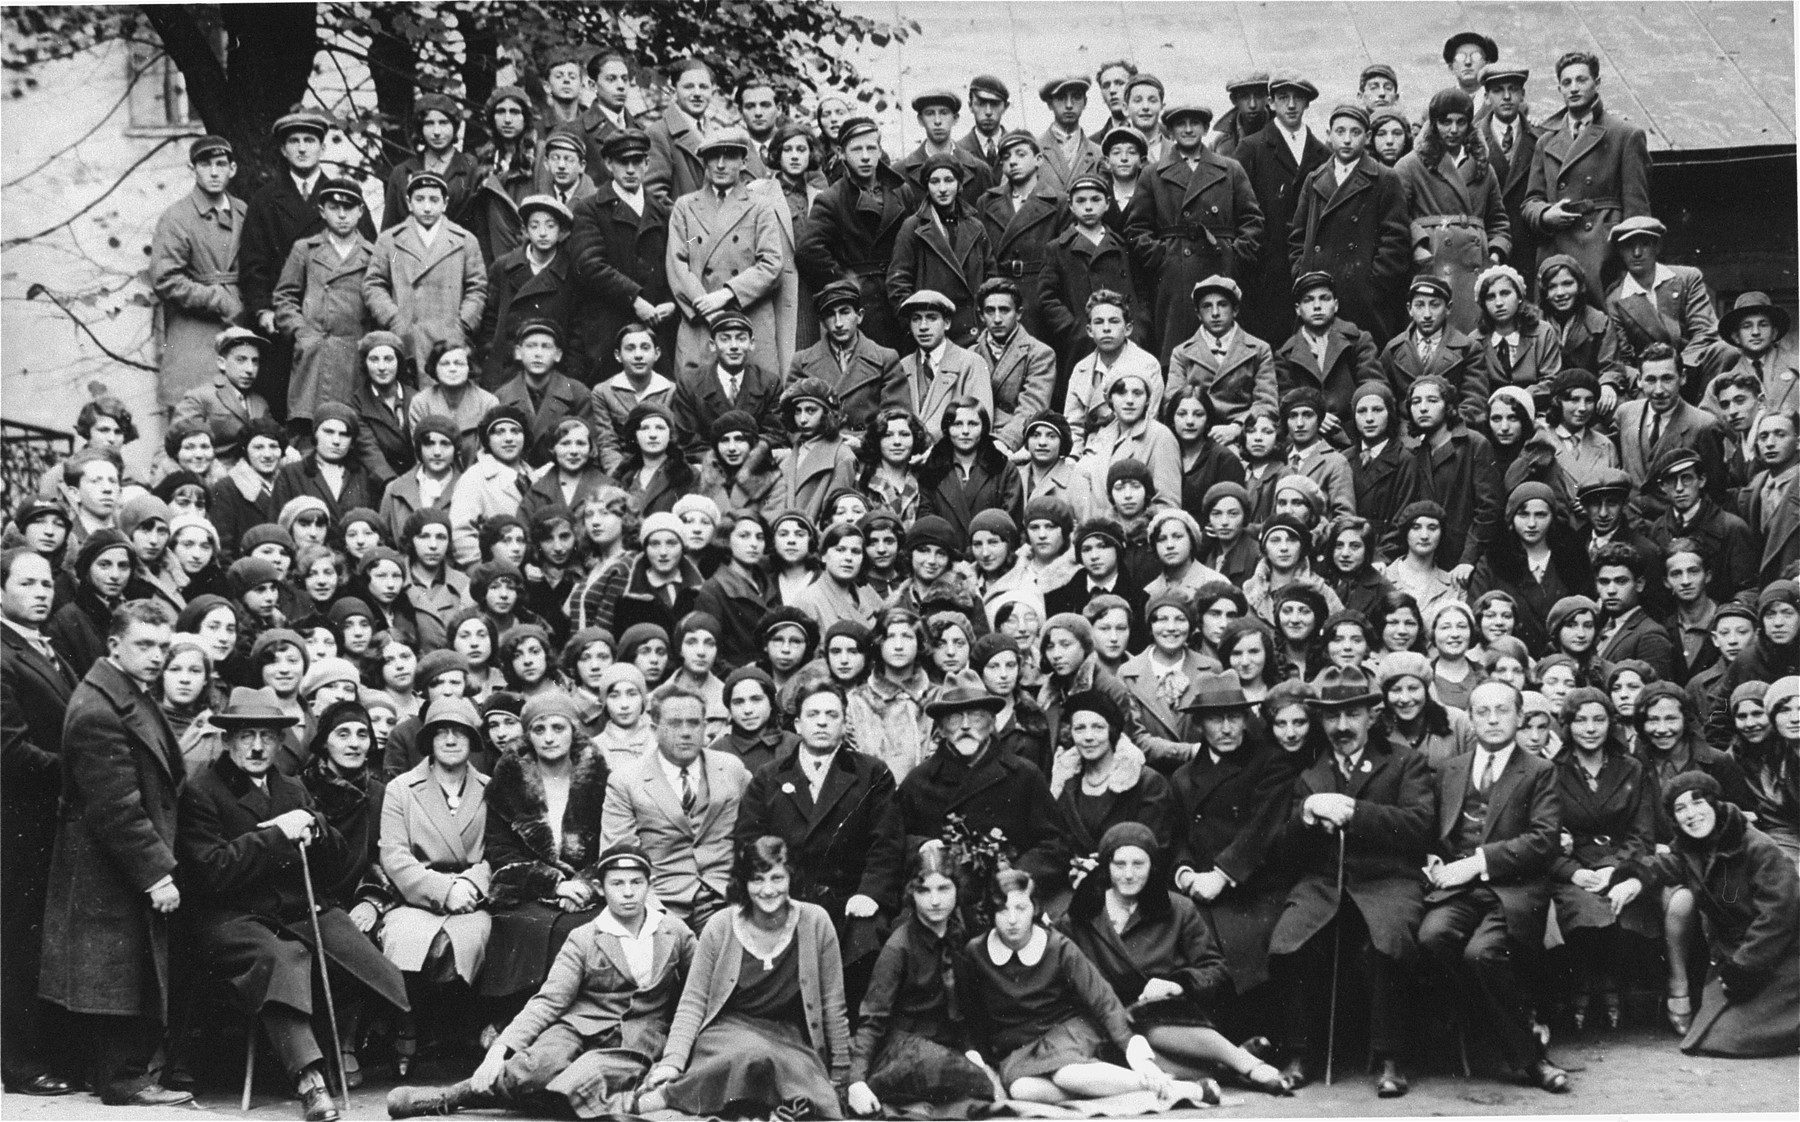 Group portrait of students from the Yiddish school in Riga.